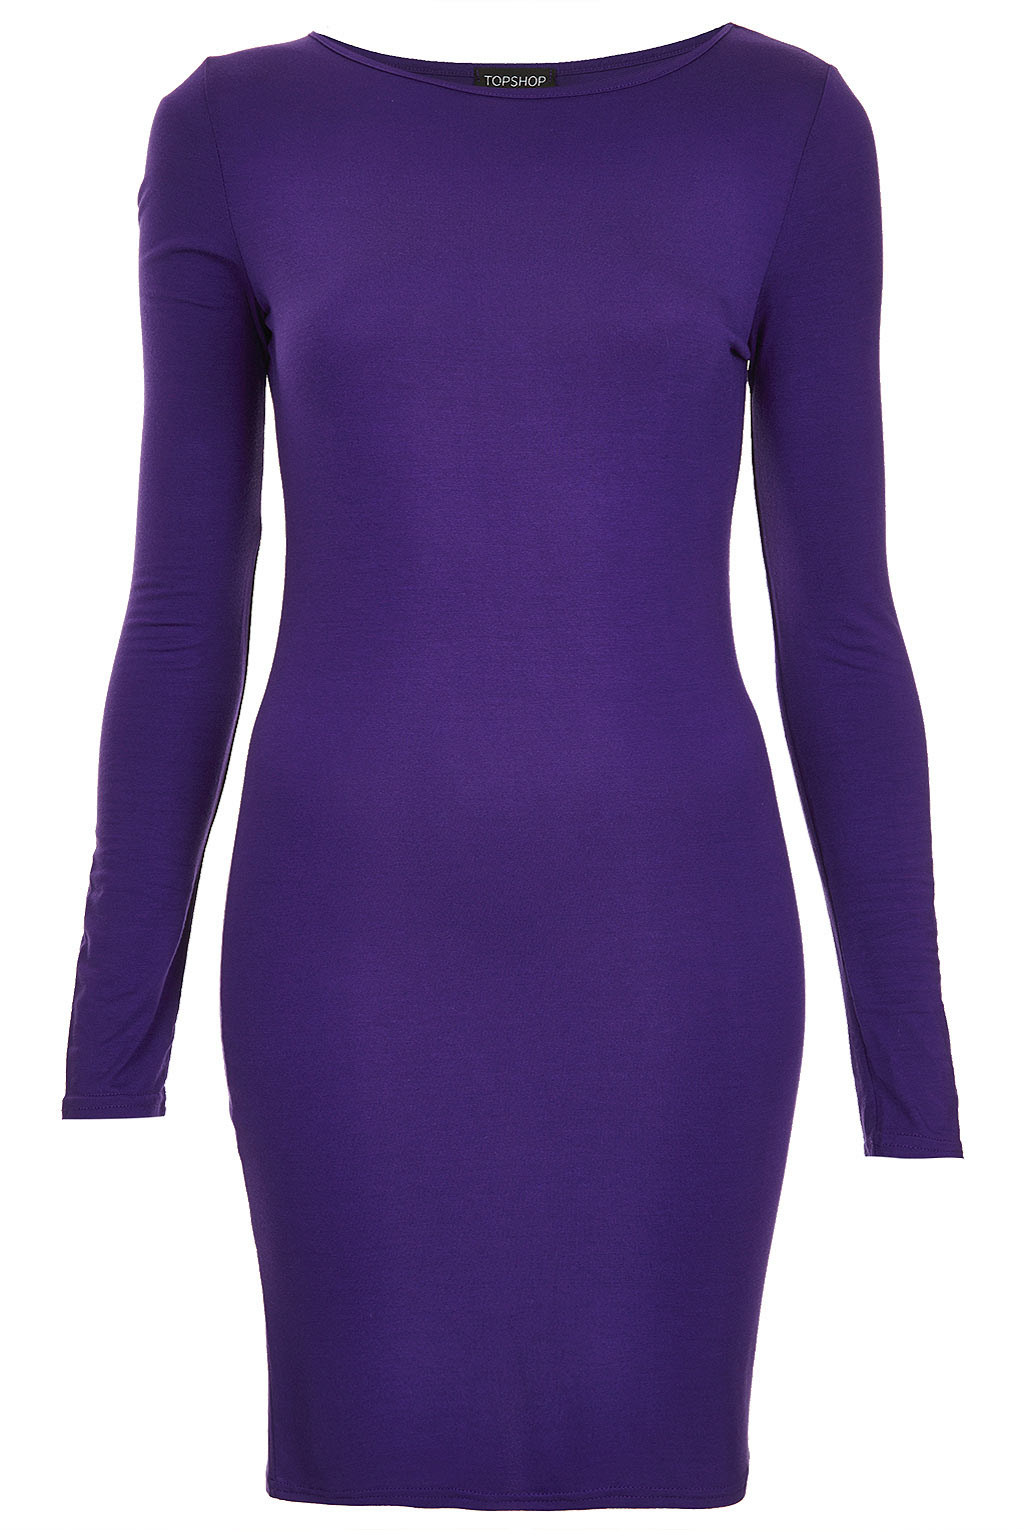 Bodycon dresses new where jersey buy that